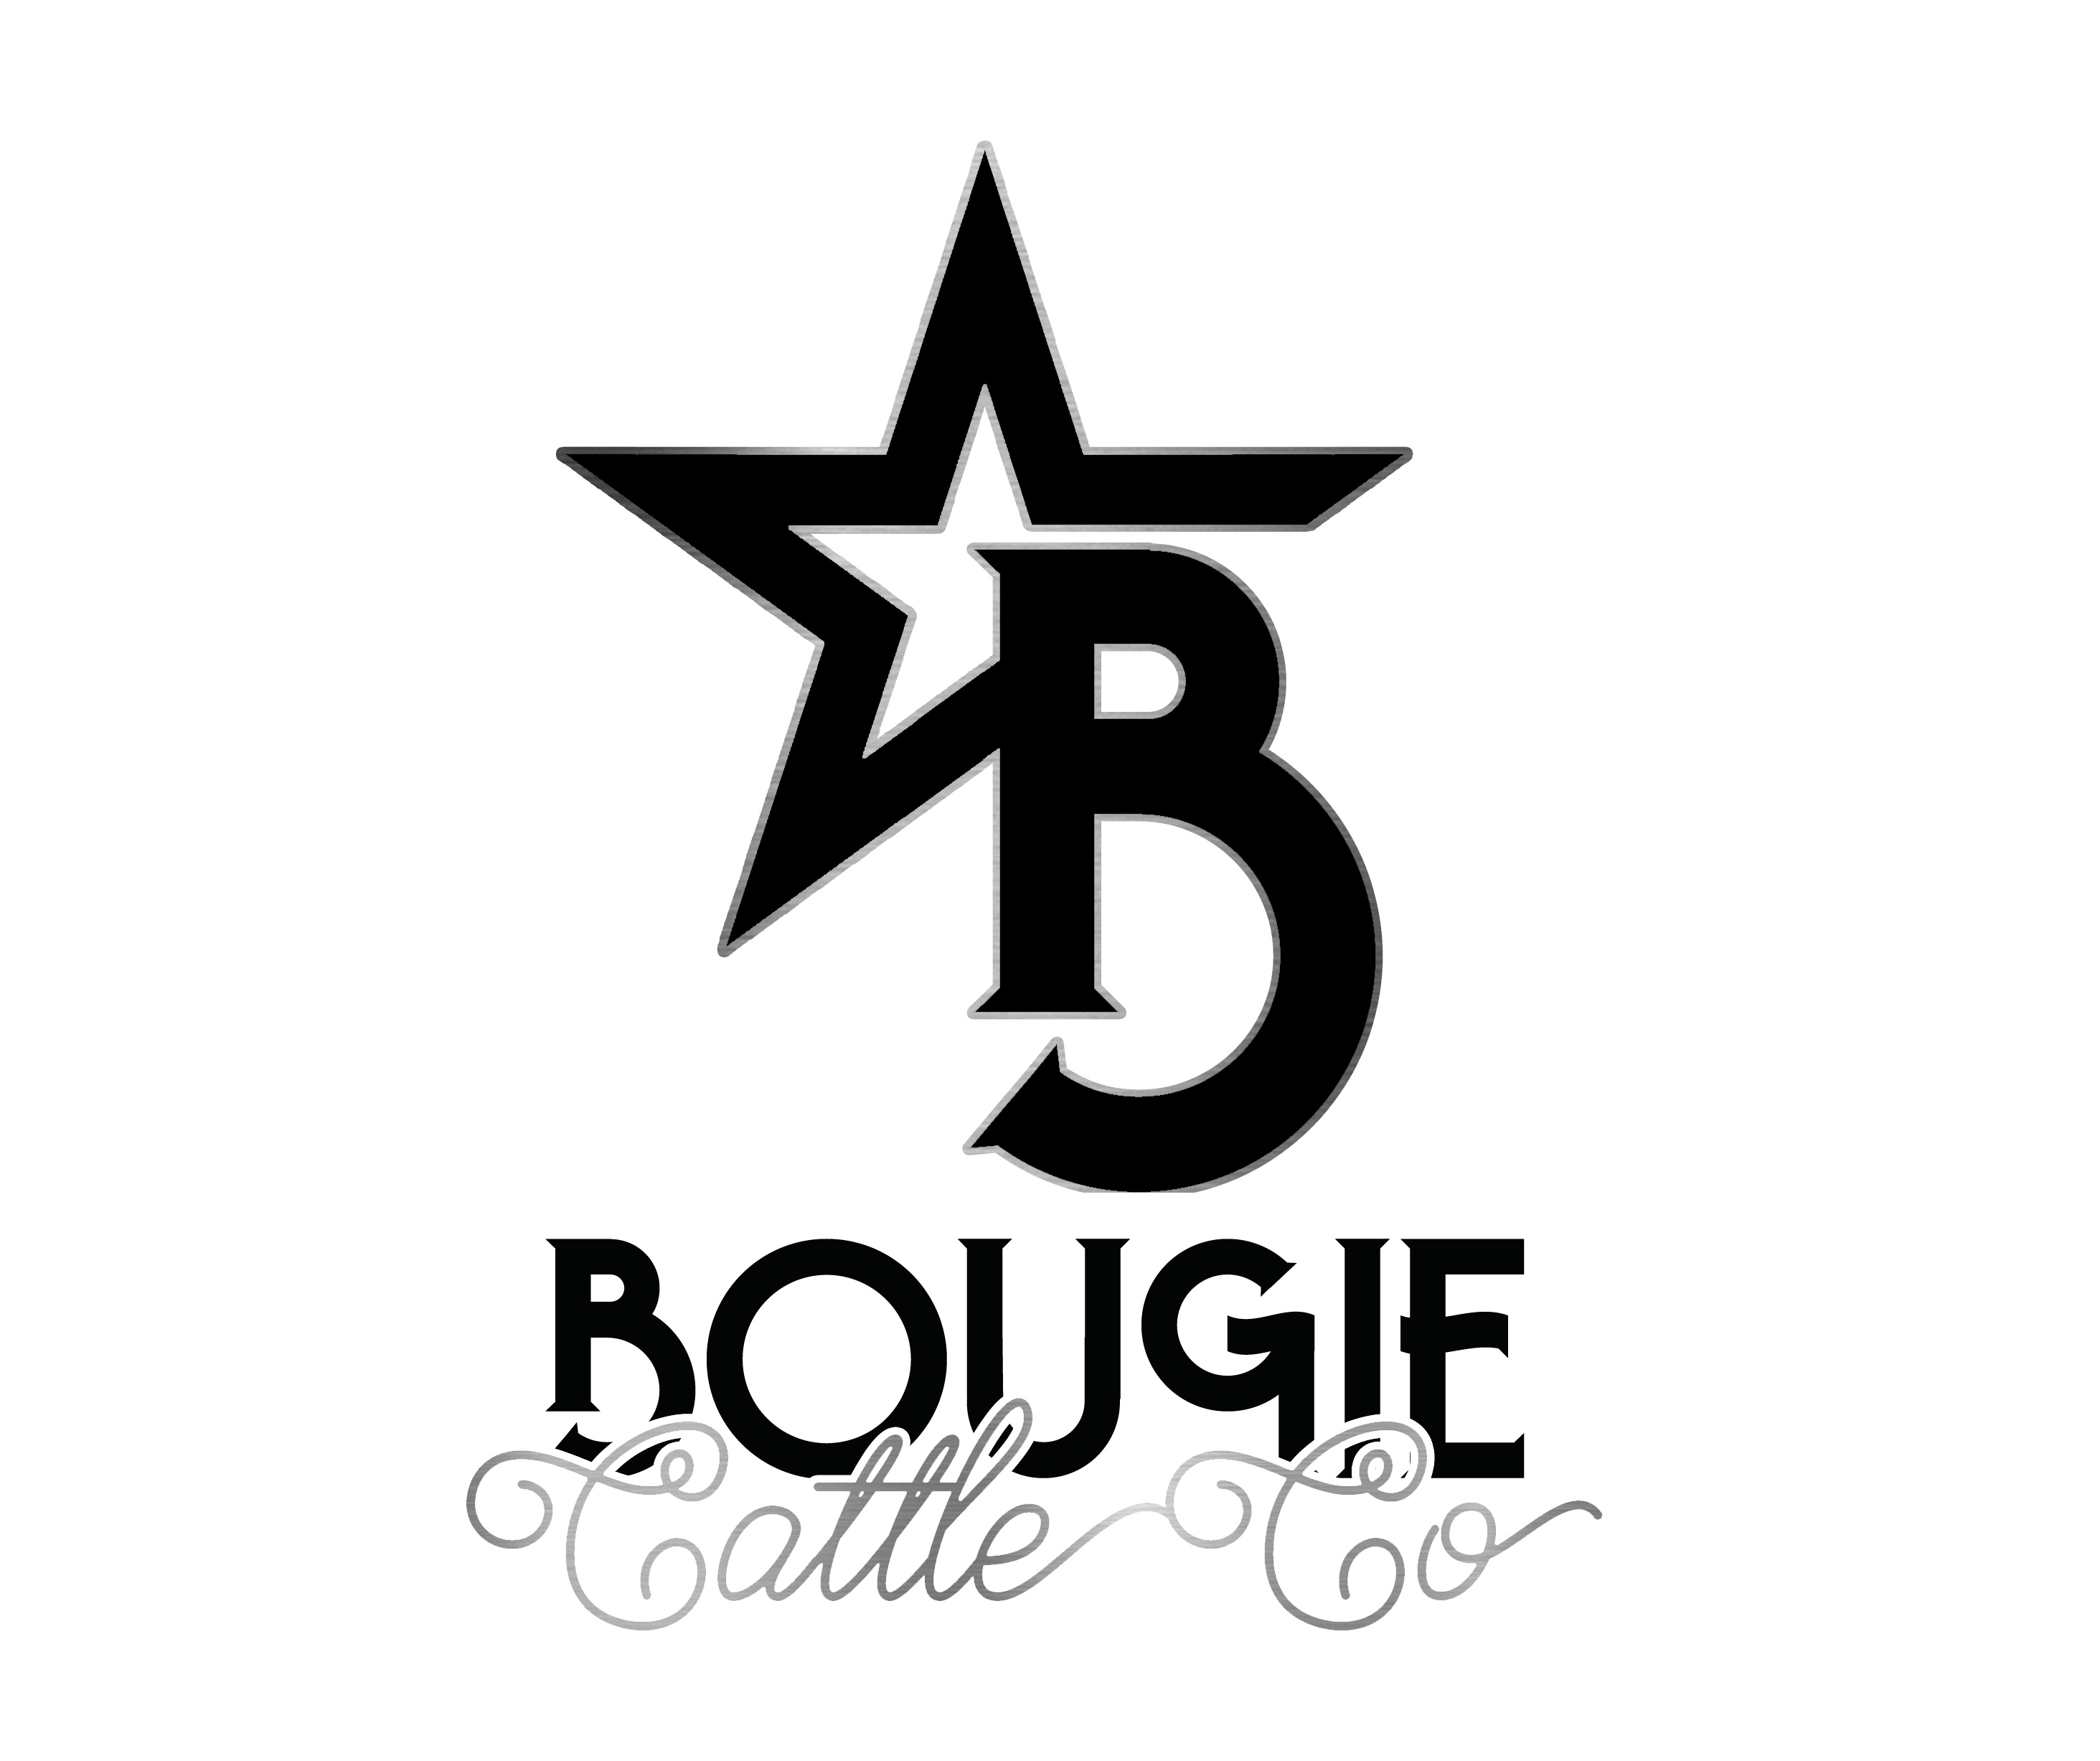 Bougie Cattle company